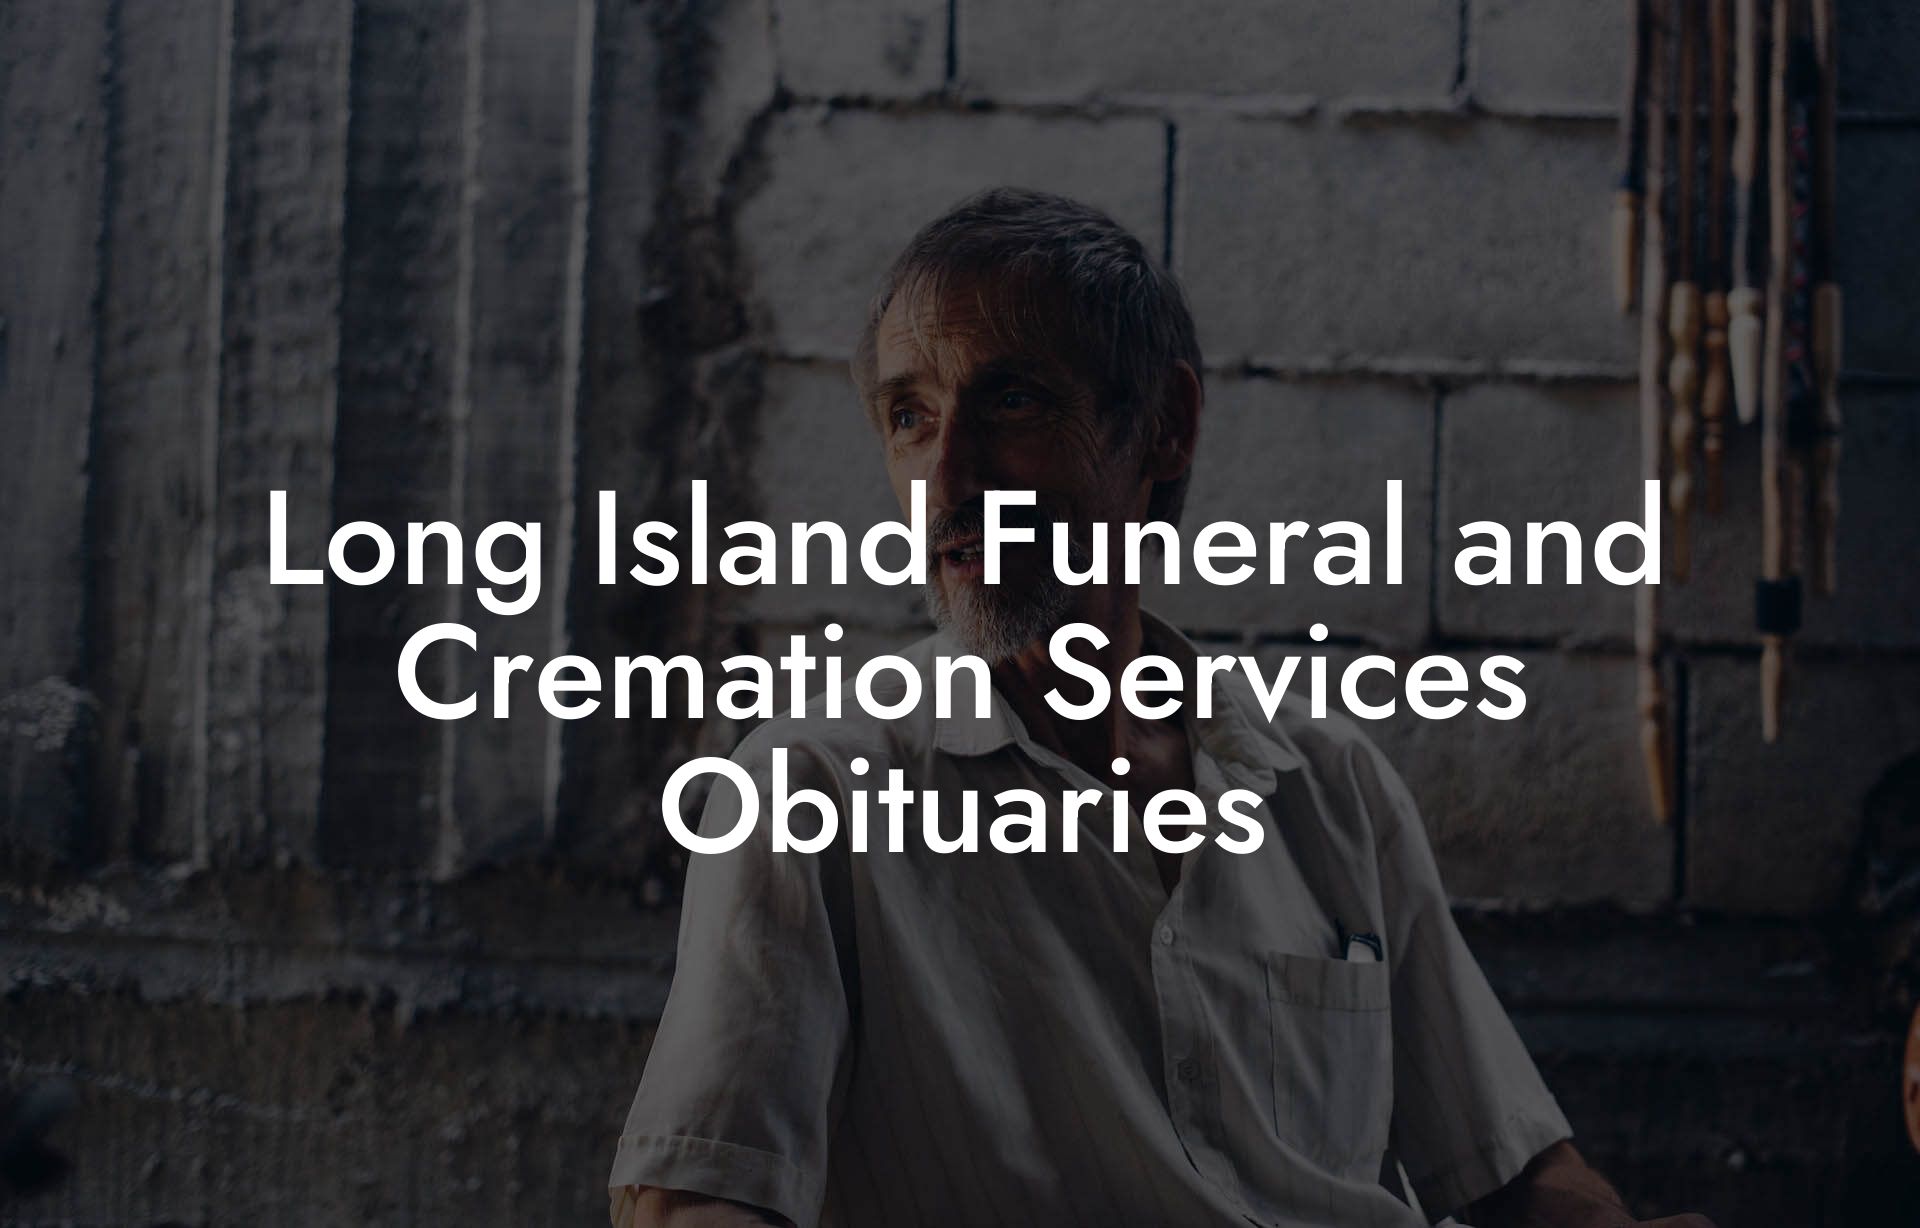 Long Island Funeral and Cremation Services Obituaries